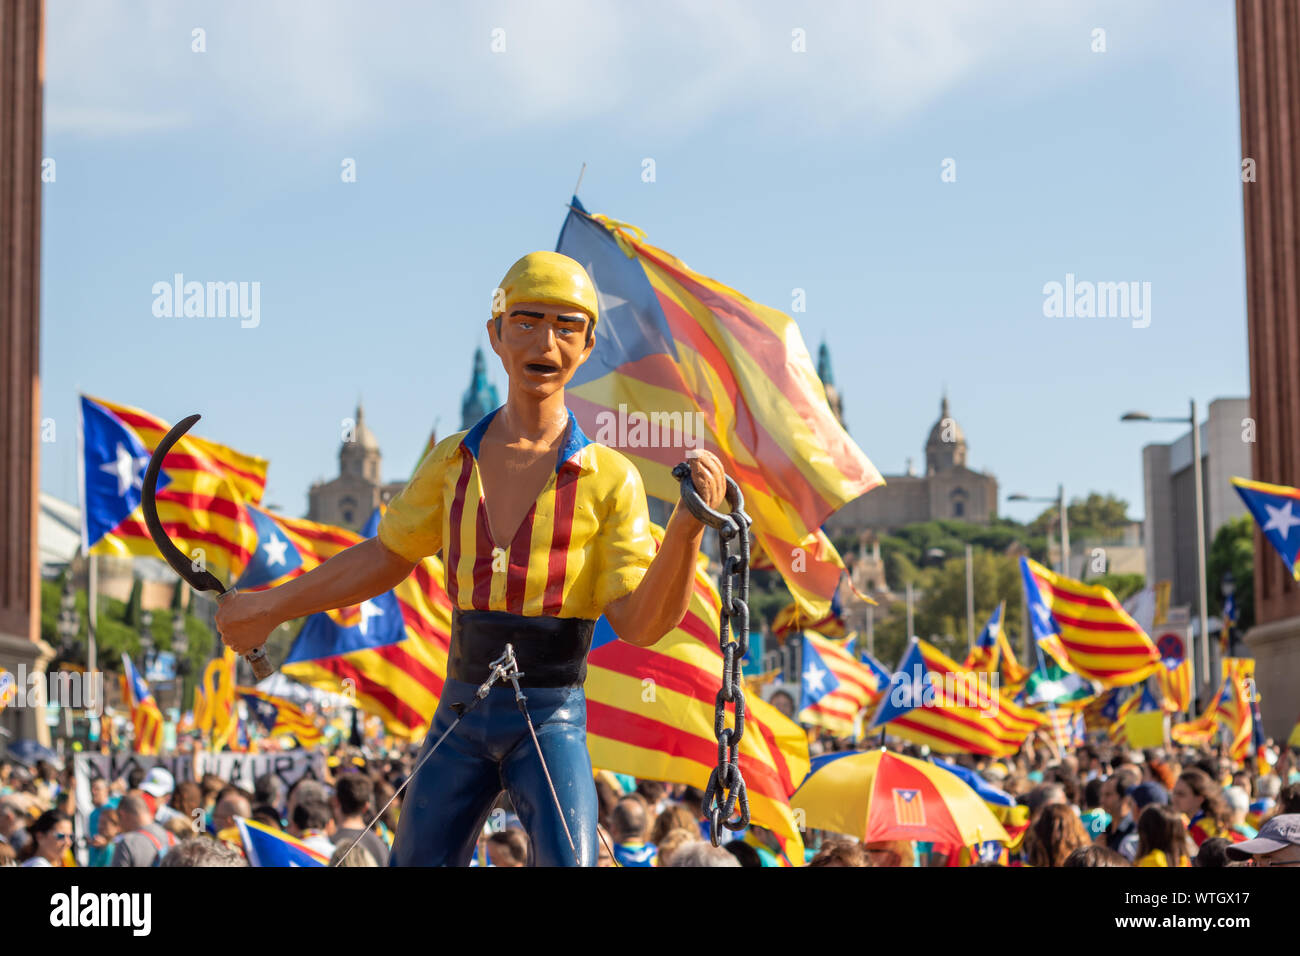 Barcelona, Catalonia / Spain - September 11, 2019: Catalan iconic reaper figure at the Independentist rally during La Diada, Catalonia's National Day. Stock Photo